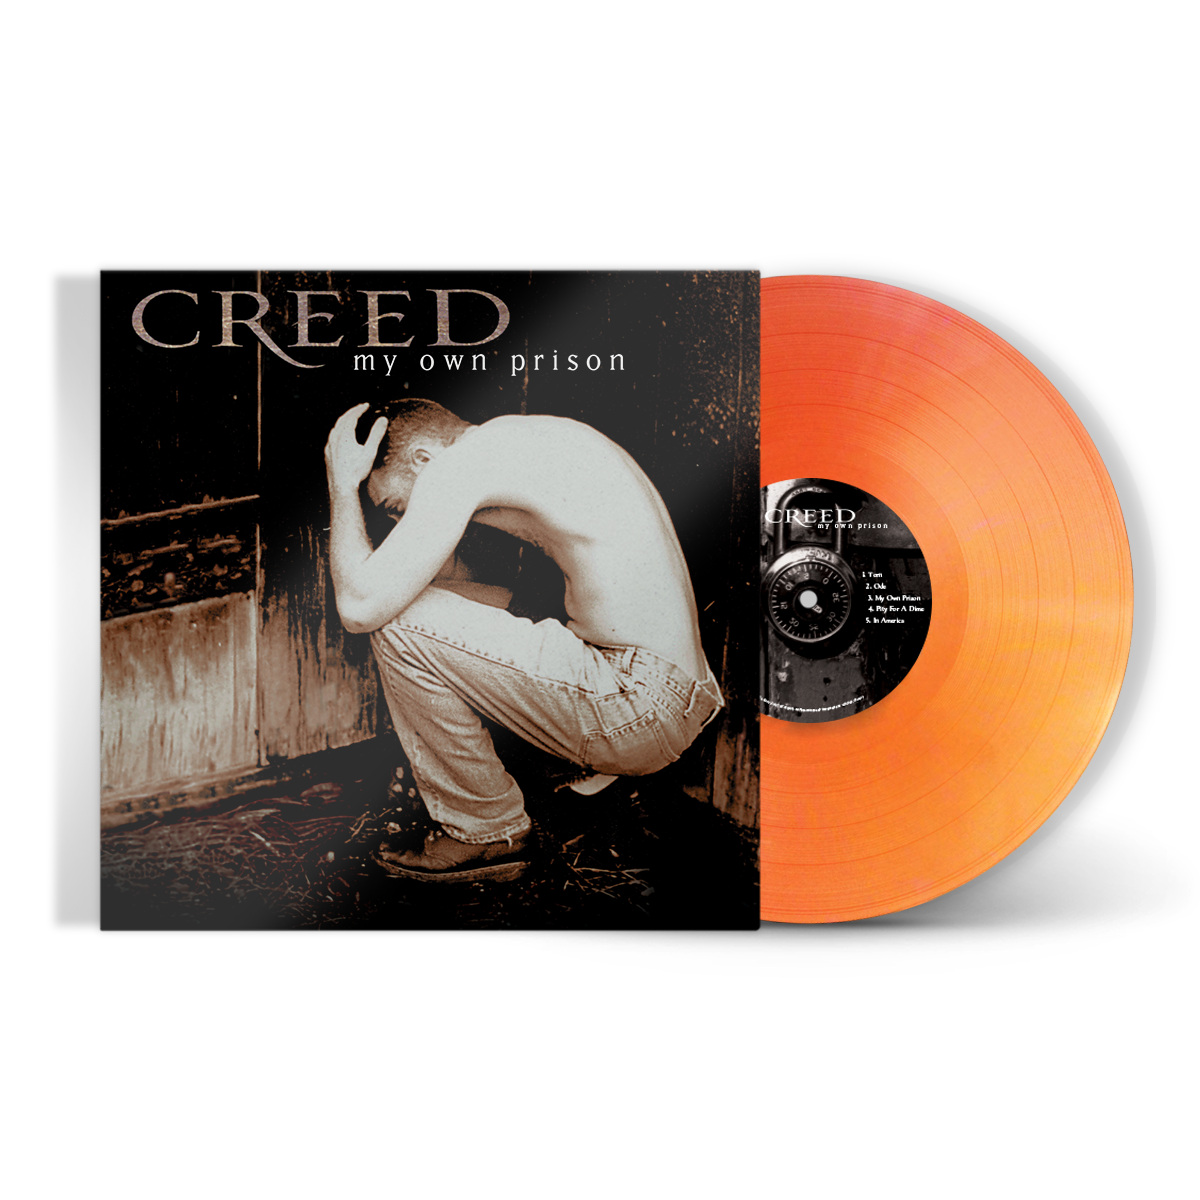 CREED ‘MY OWN PRISON’ LP (Limited Edition – Only 1000 made, Opaque Orange Vinyl)